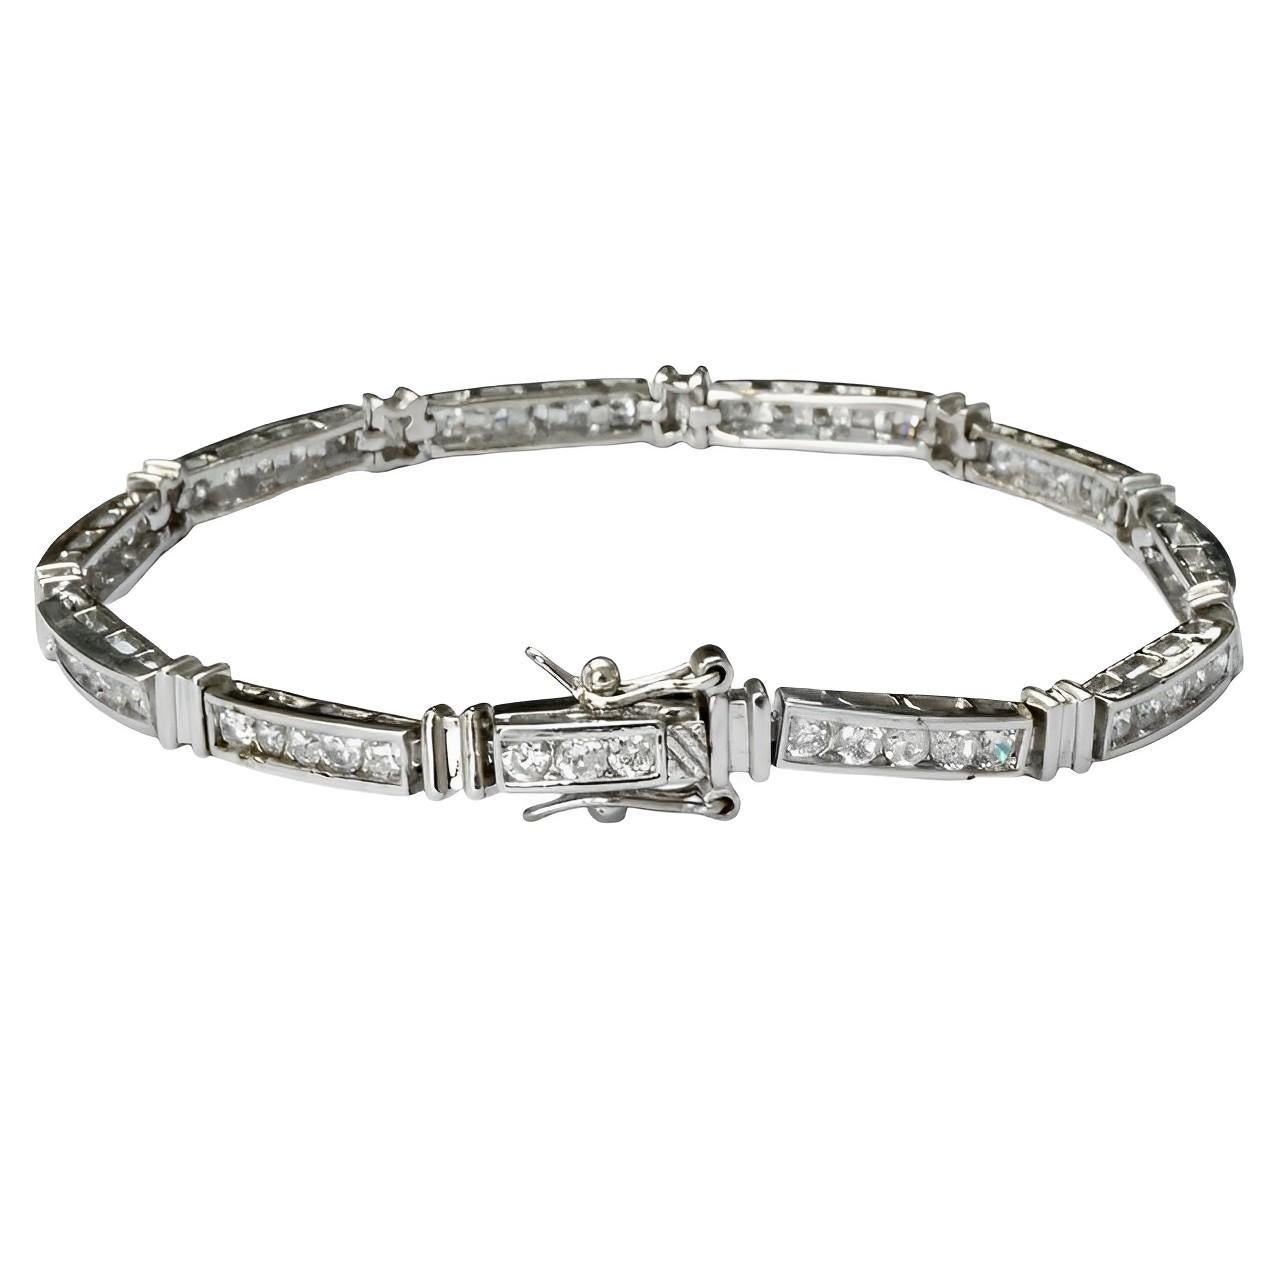 Beautiful silver link bracelet with double safety catches, featuring five channel set rhinestones in each link. Measuring length 19.4 cm / 7.6 inches by width 3.5 mm / .13 inch. The bracelet tests for silver, and is in very good condition.

This